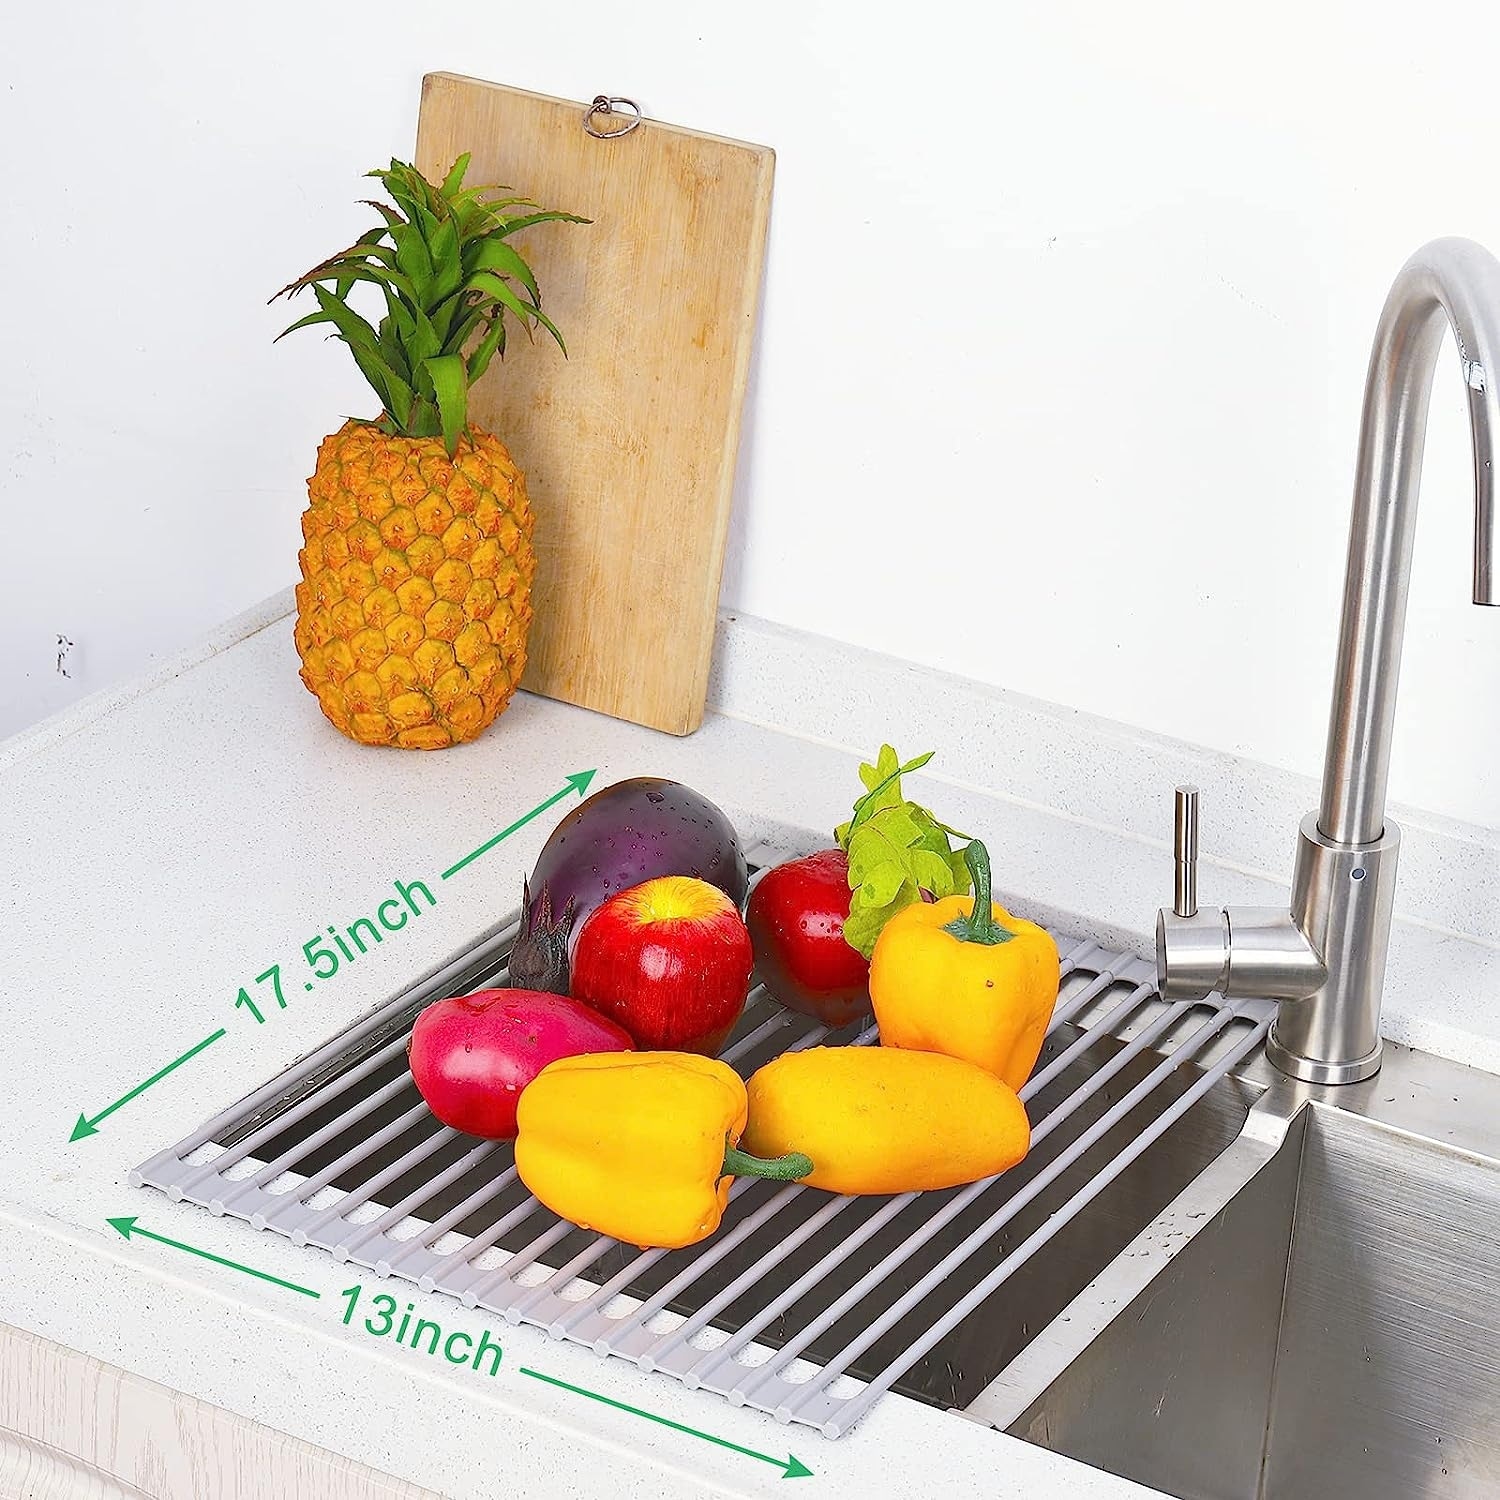 https://ak1.ostkcdn.com/images/products/is/images/direct/e53b475531645456a876b8a69b592b0ba79f91a2/Roll-Up-Dish-Drying-Rack.jpg